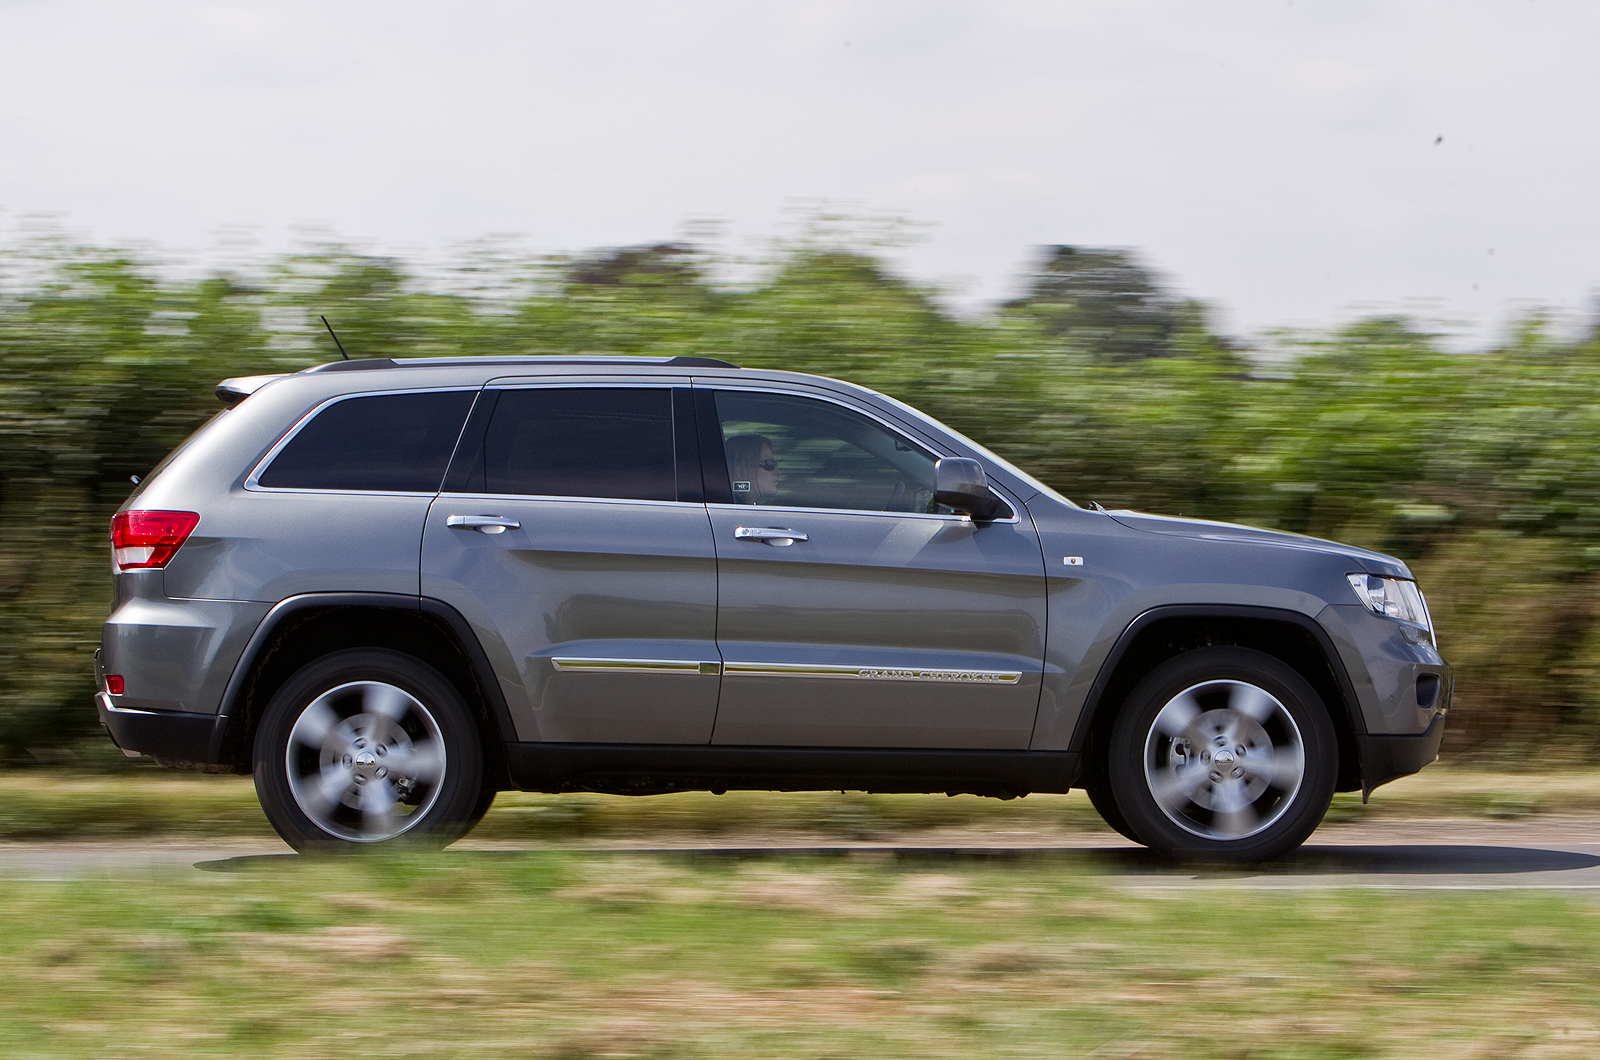 Used Jeep Grand Cherokee 2011-2020 review